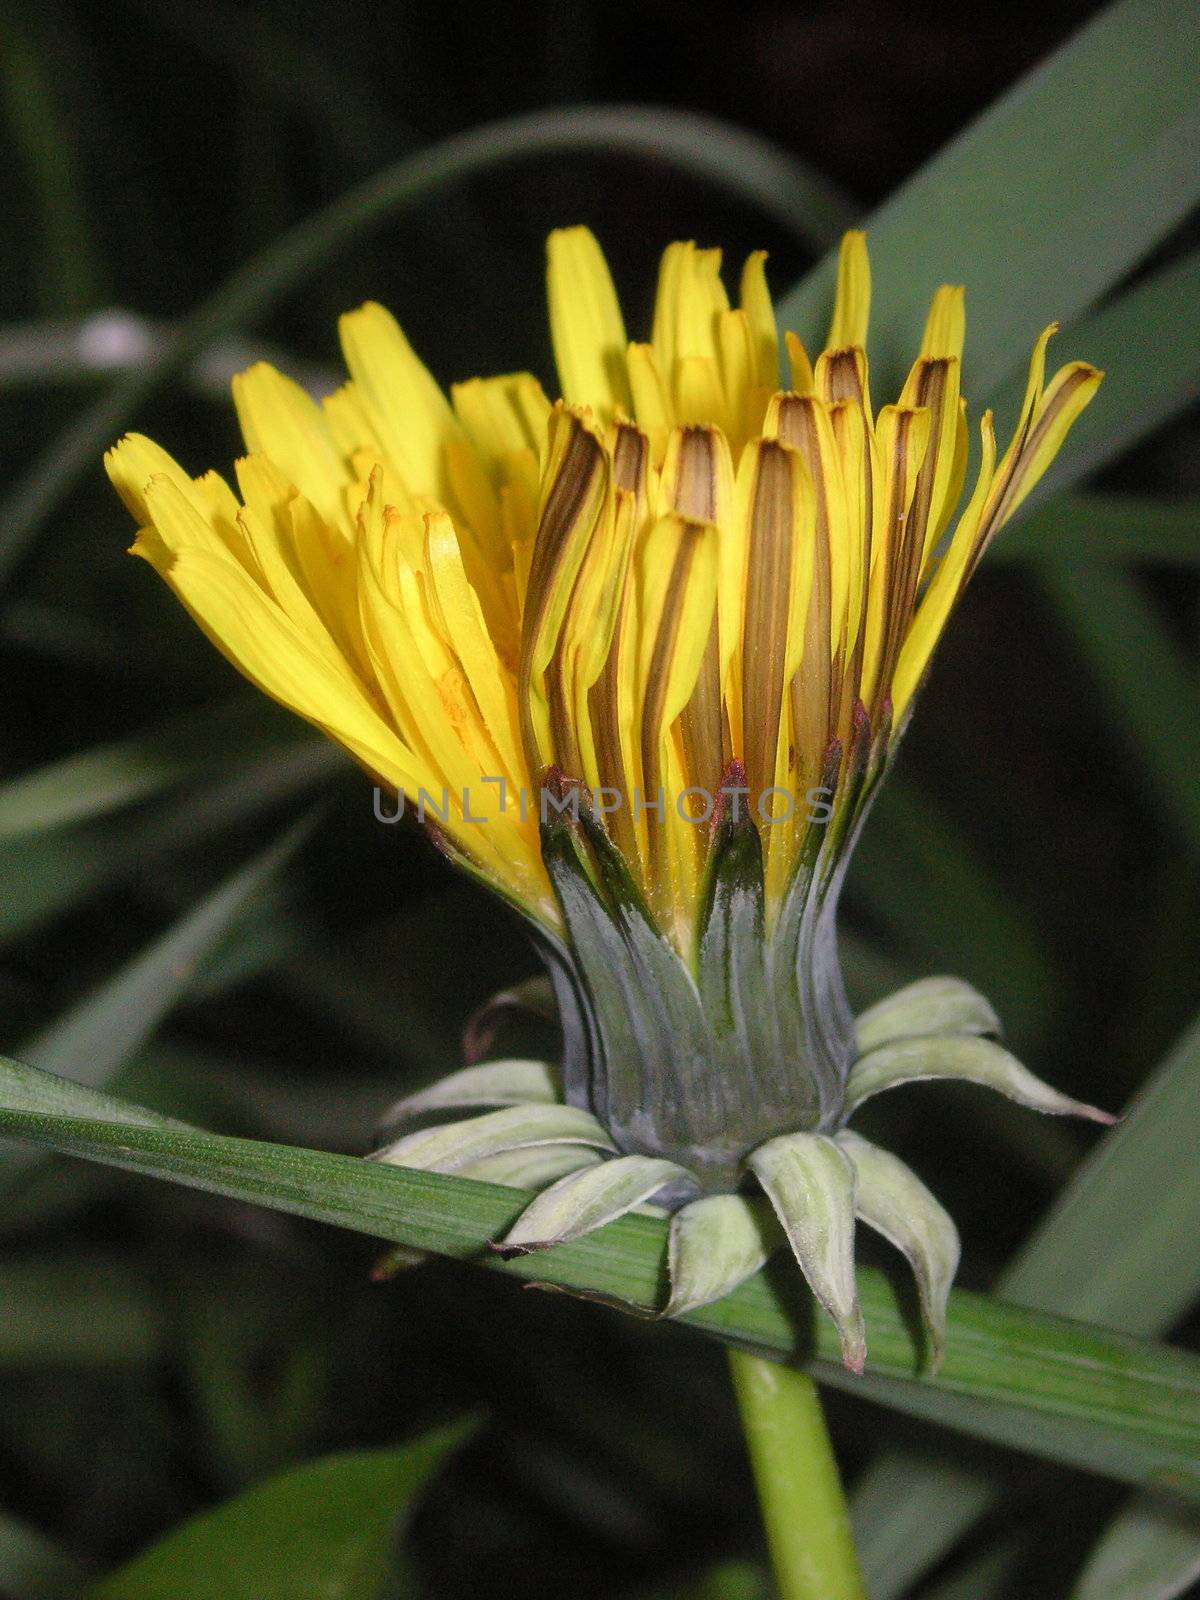 flower of a dandelion just opening amongst the grass